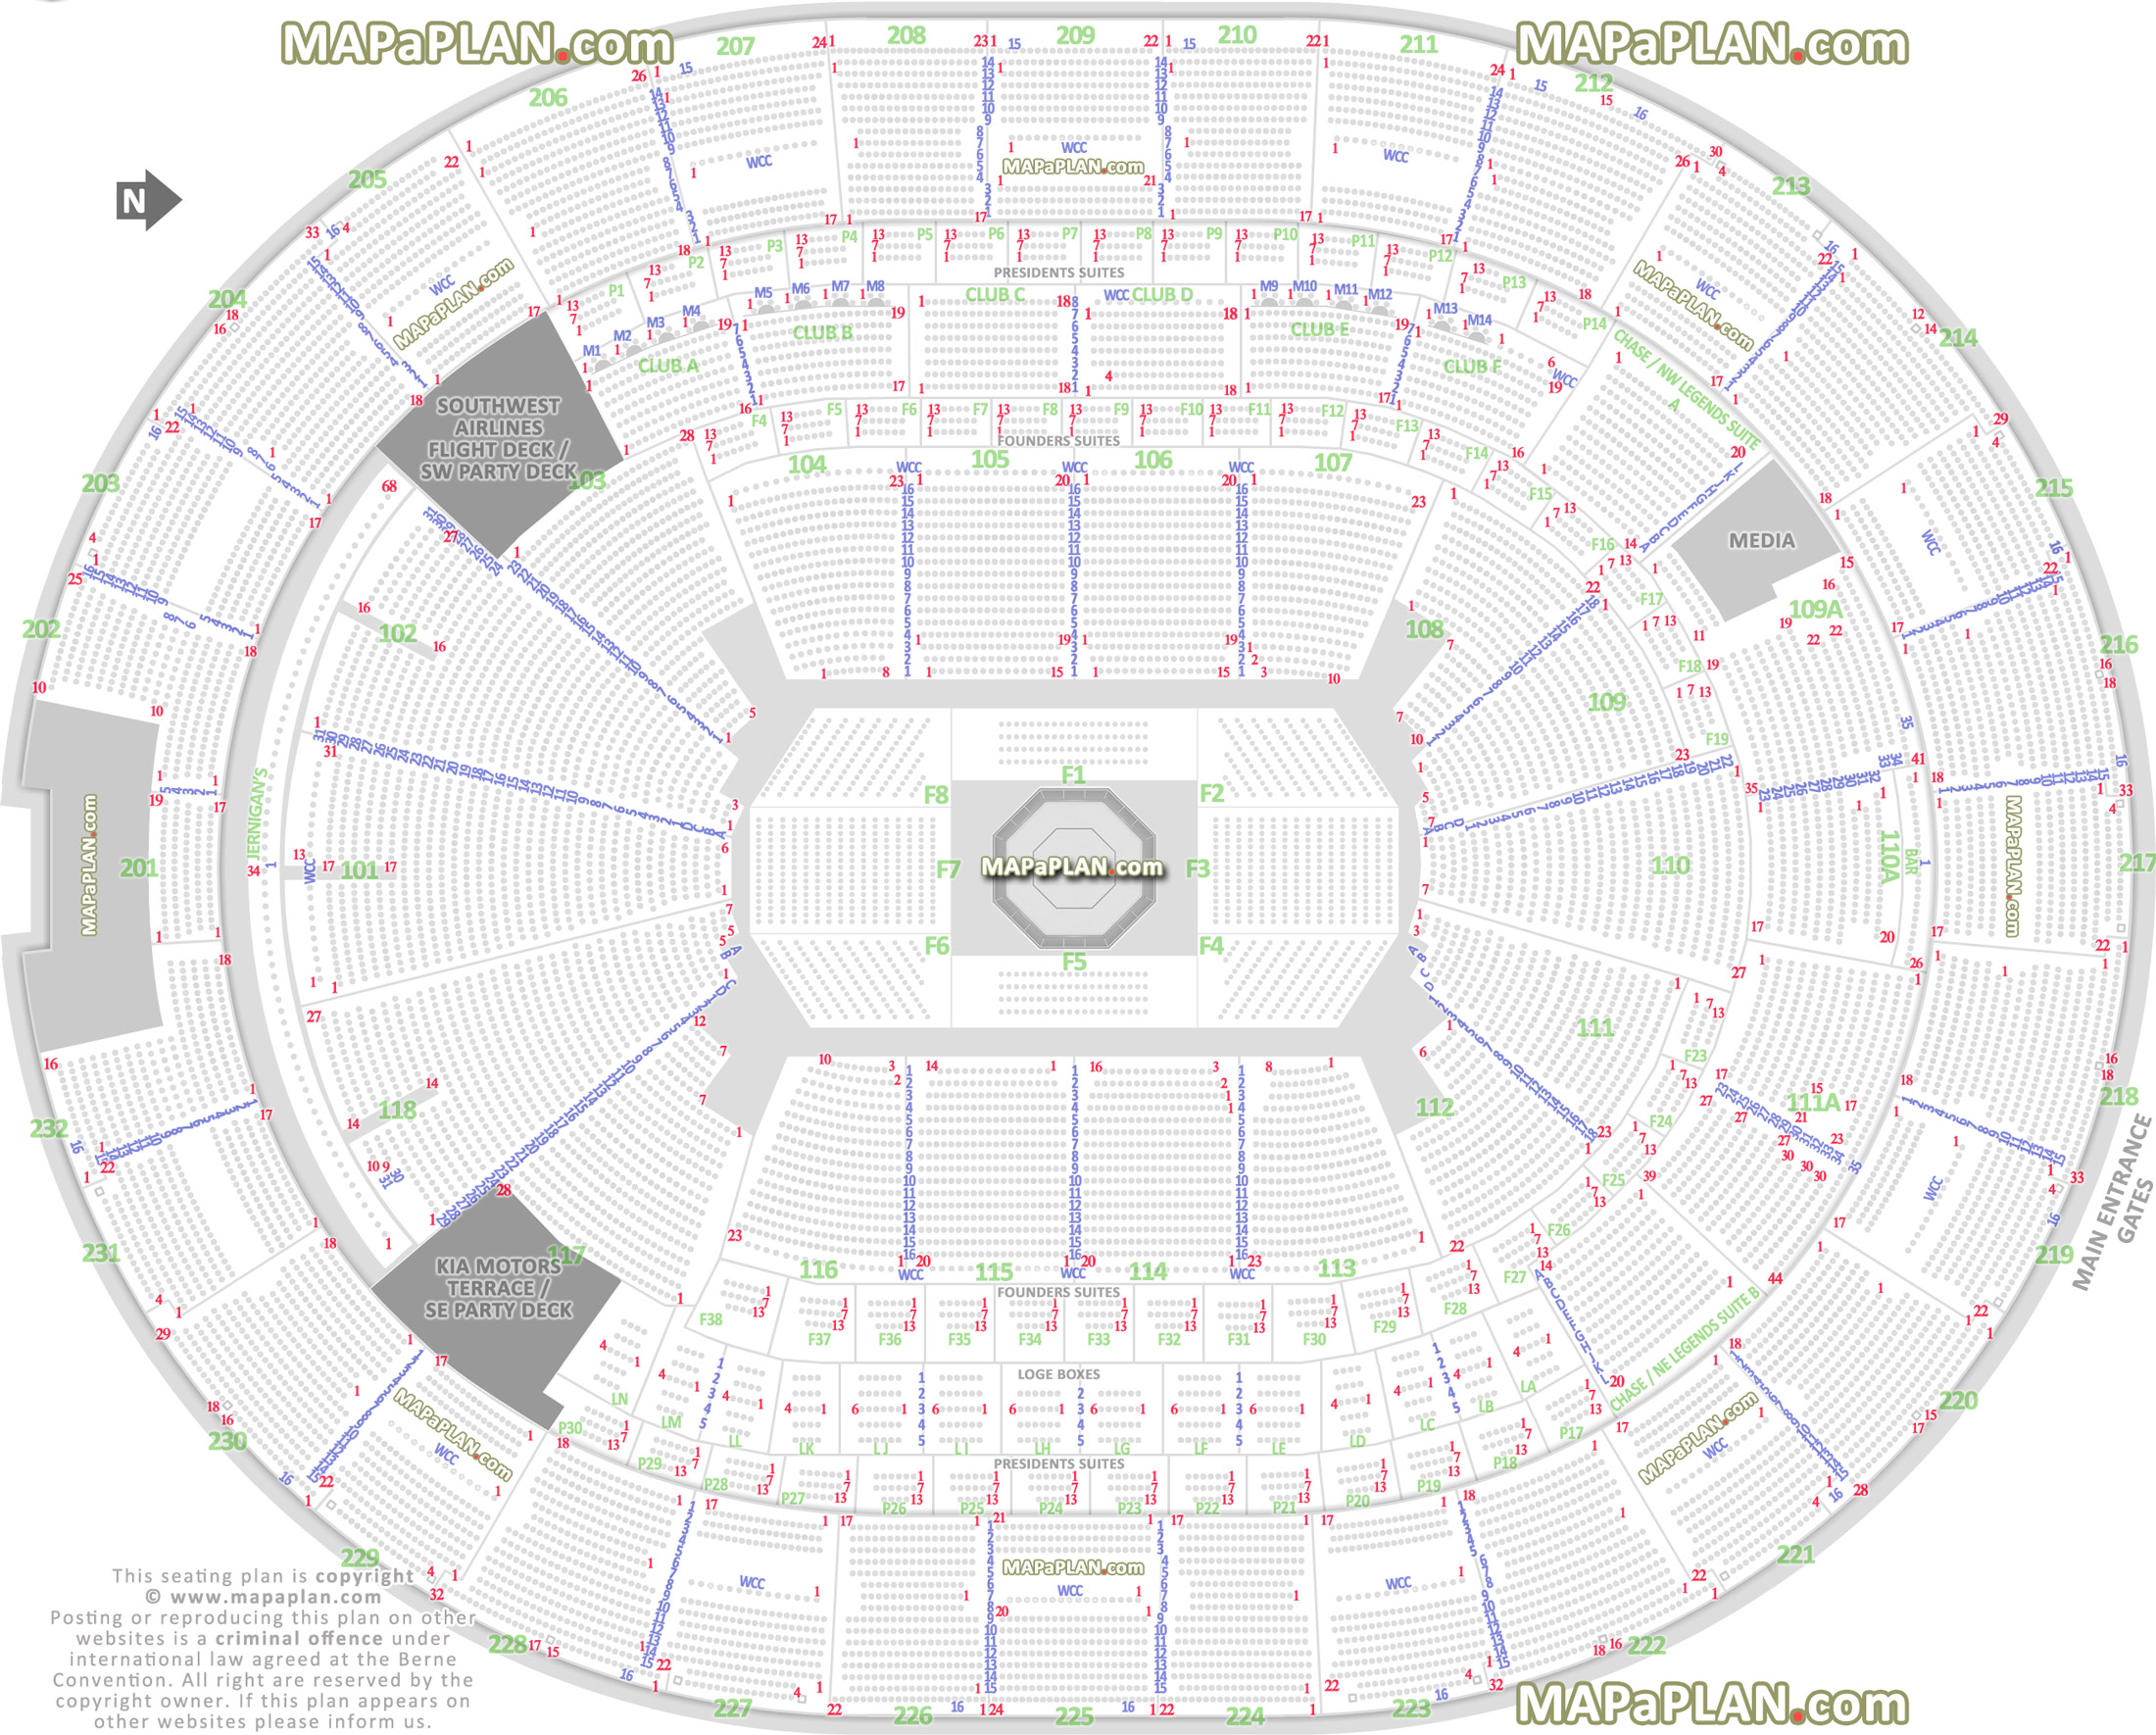 ufc mma fights fully seated setup viewer premium luxury executive vip lounge main entrance gates map wheelchair disabled seating Orlando Amway Center seating chart